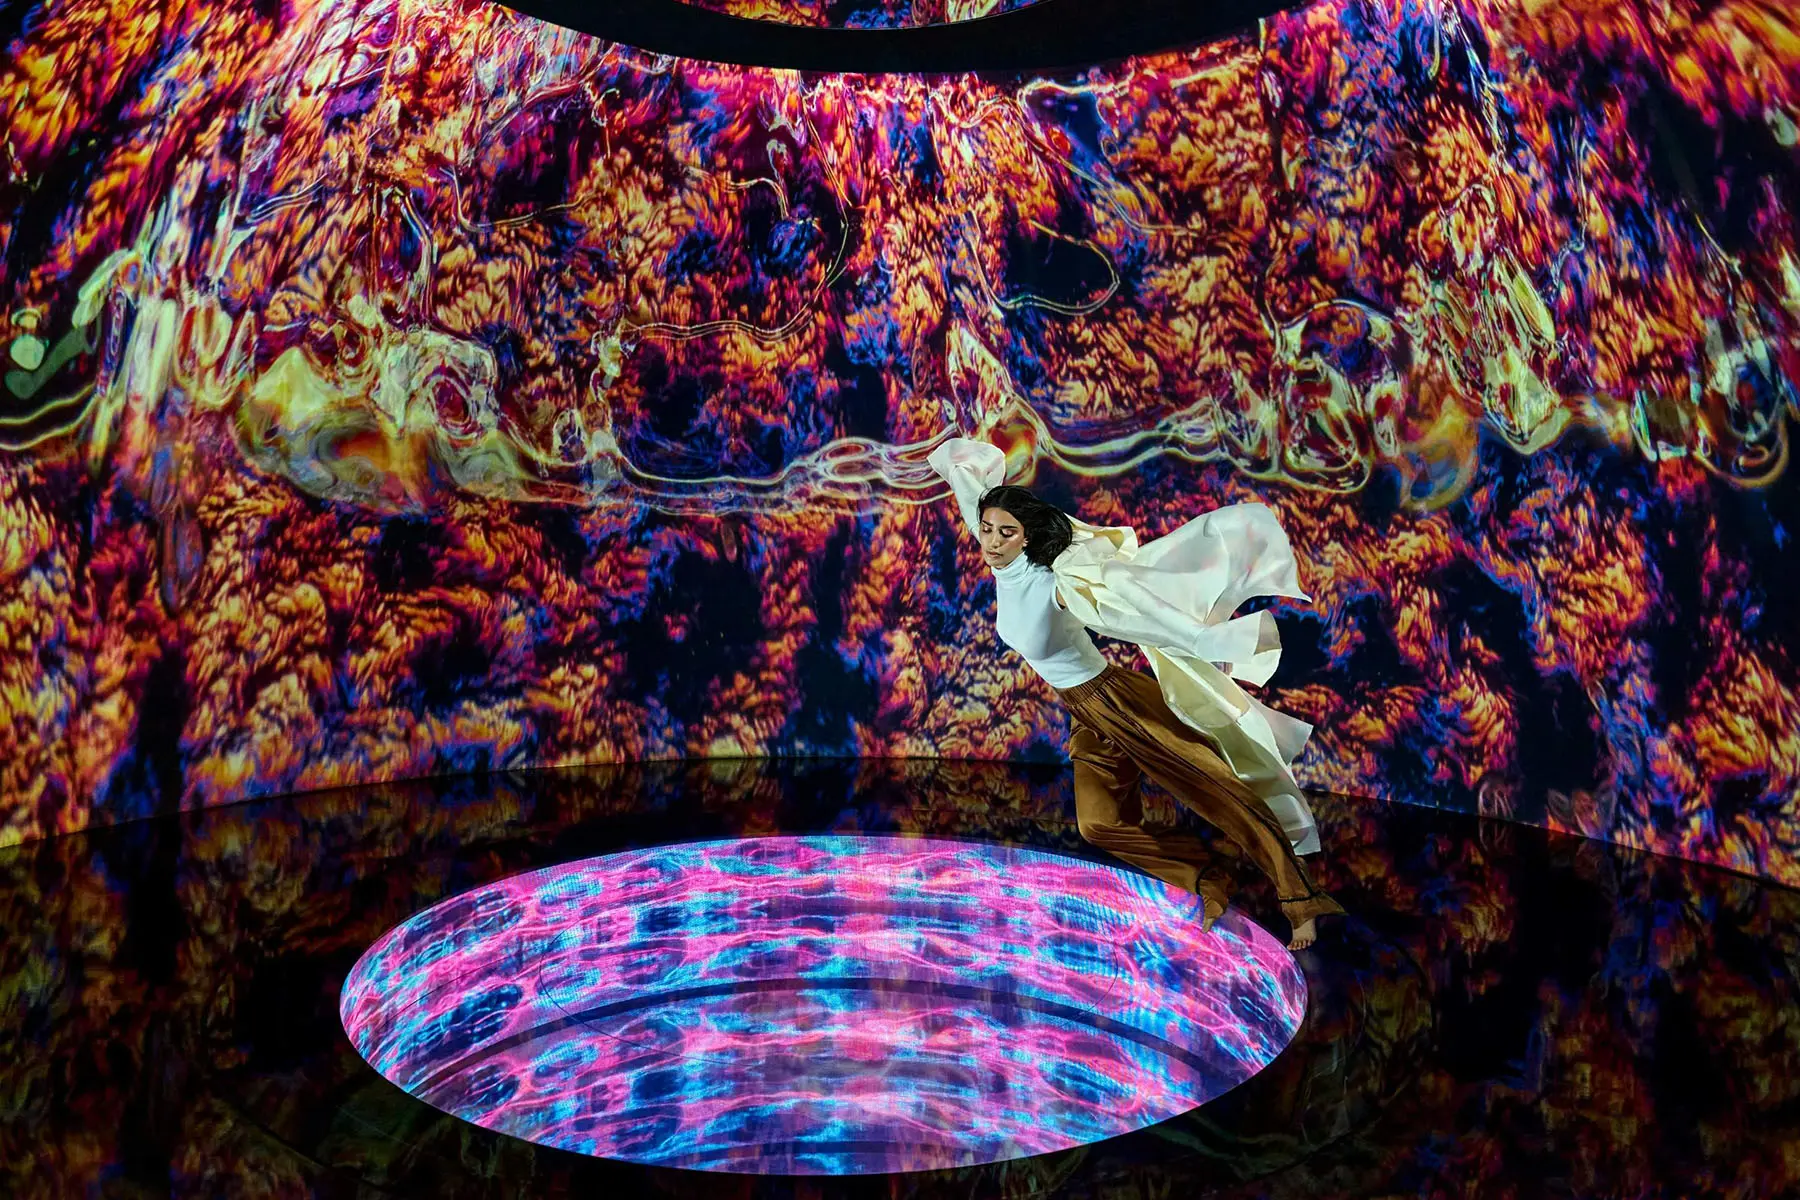 Visit the Aya Universe attraction in Dubai